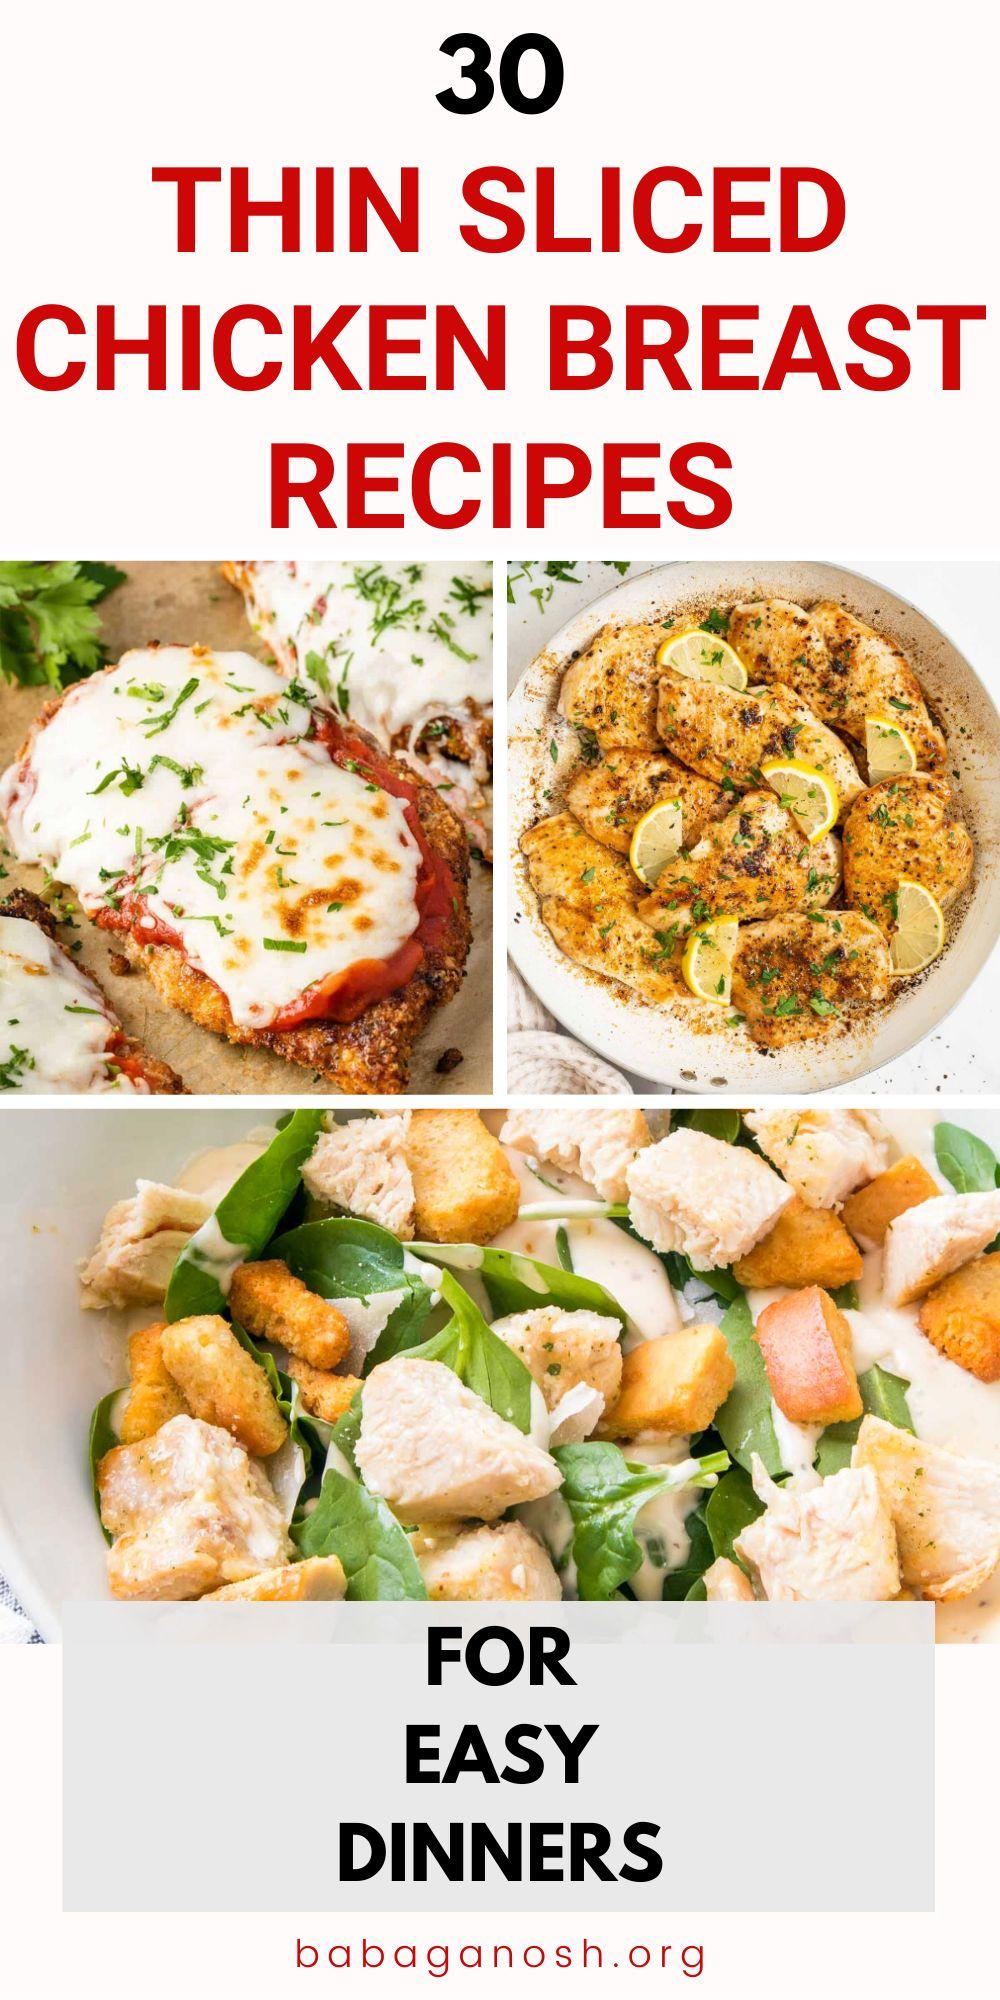 Image with text: 30 thin sliced chicken breast recipes for easy dinners